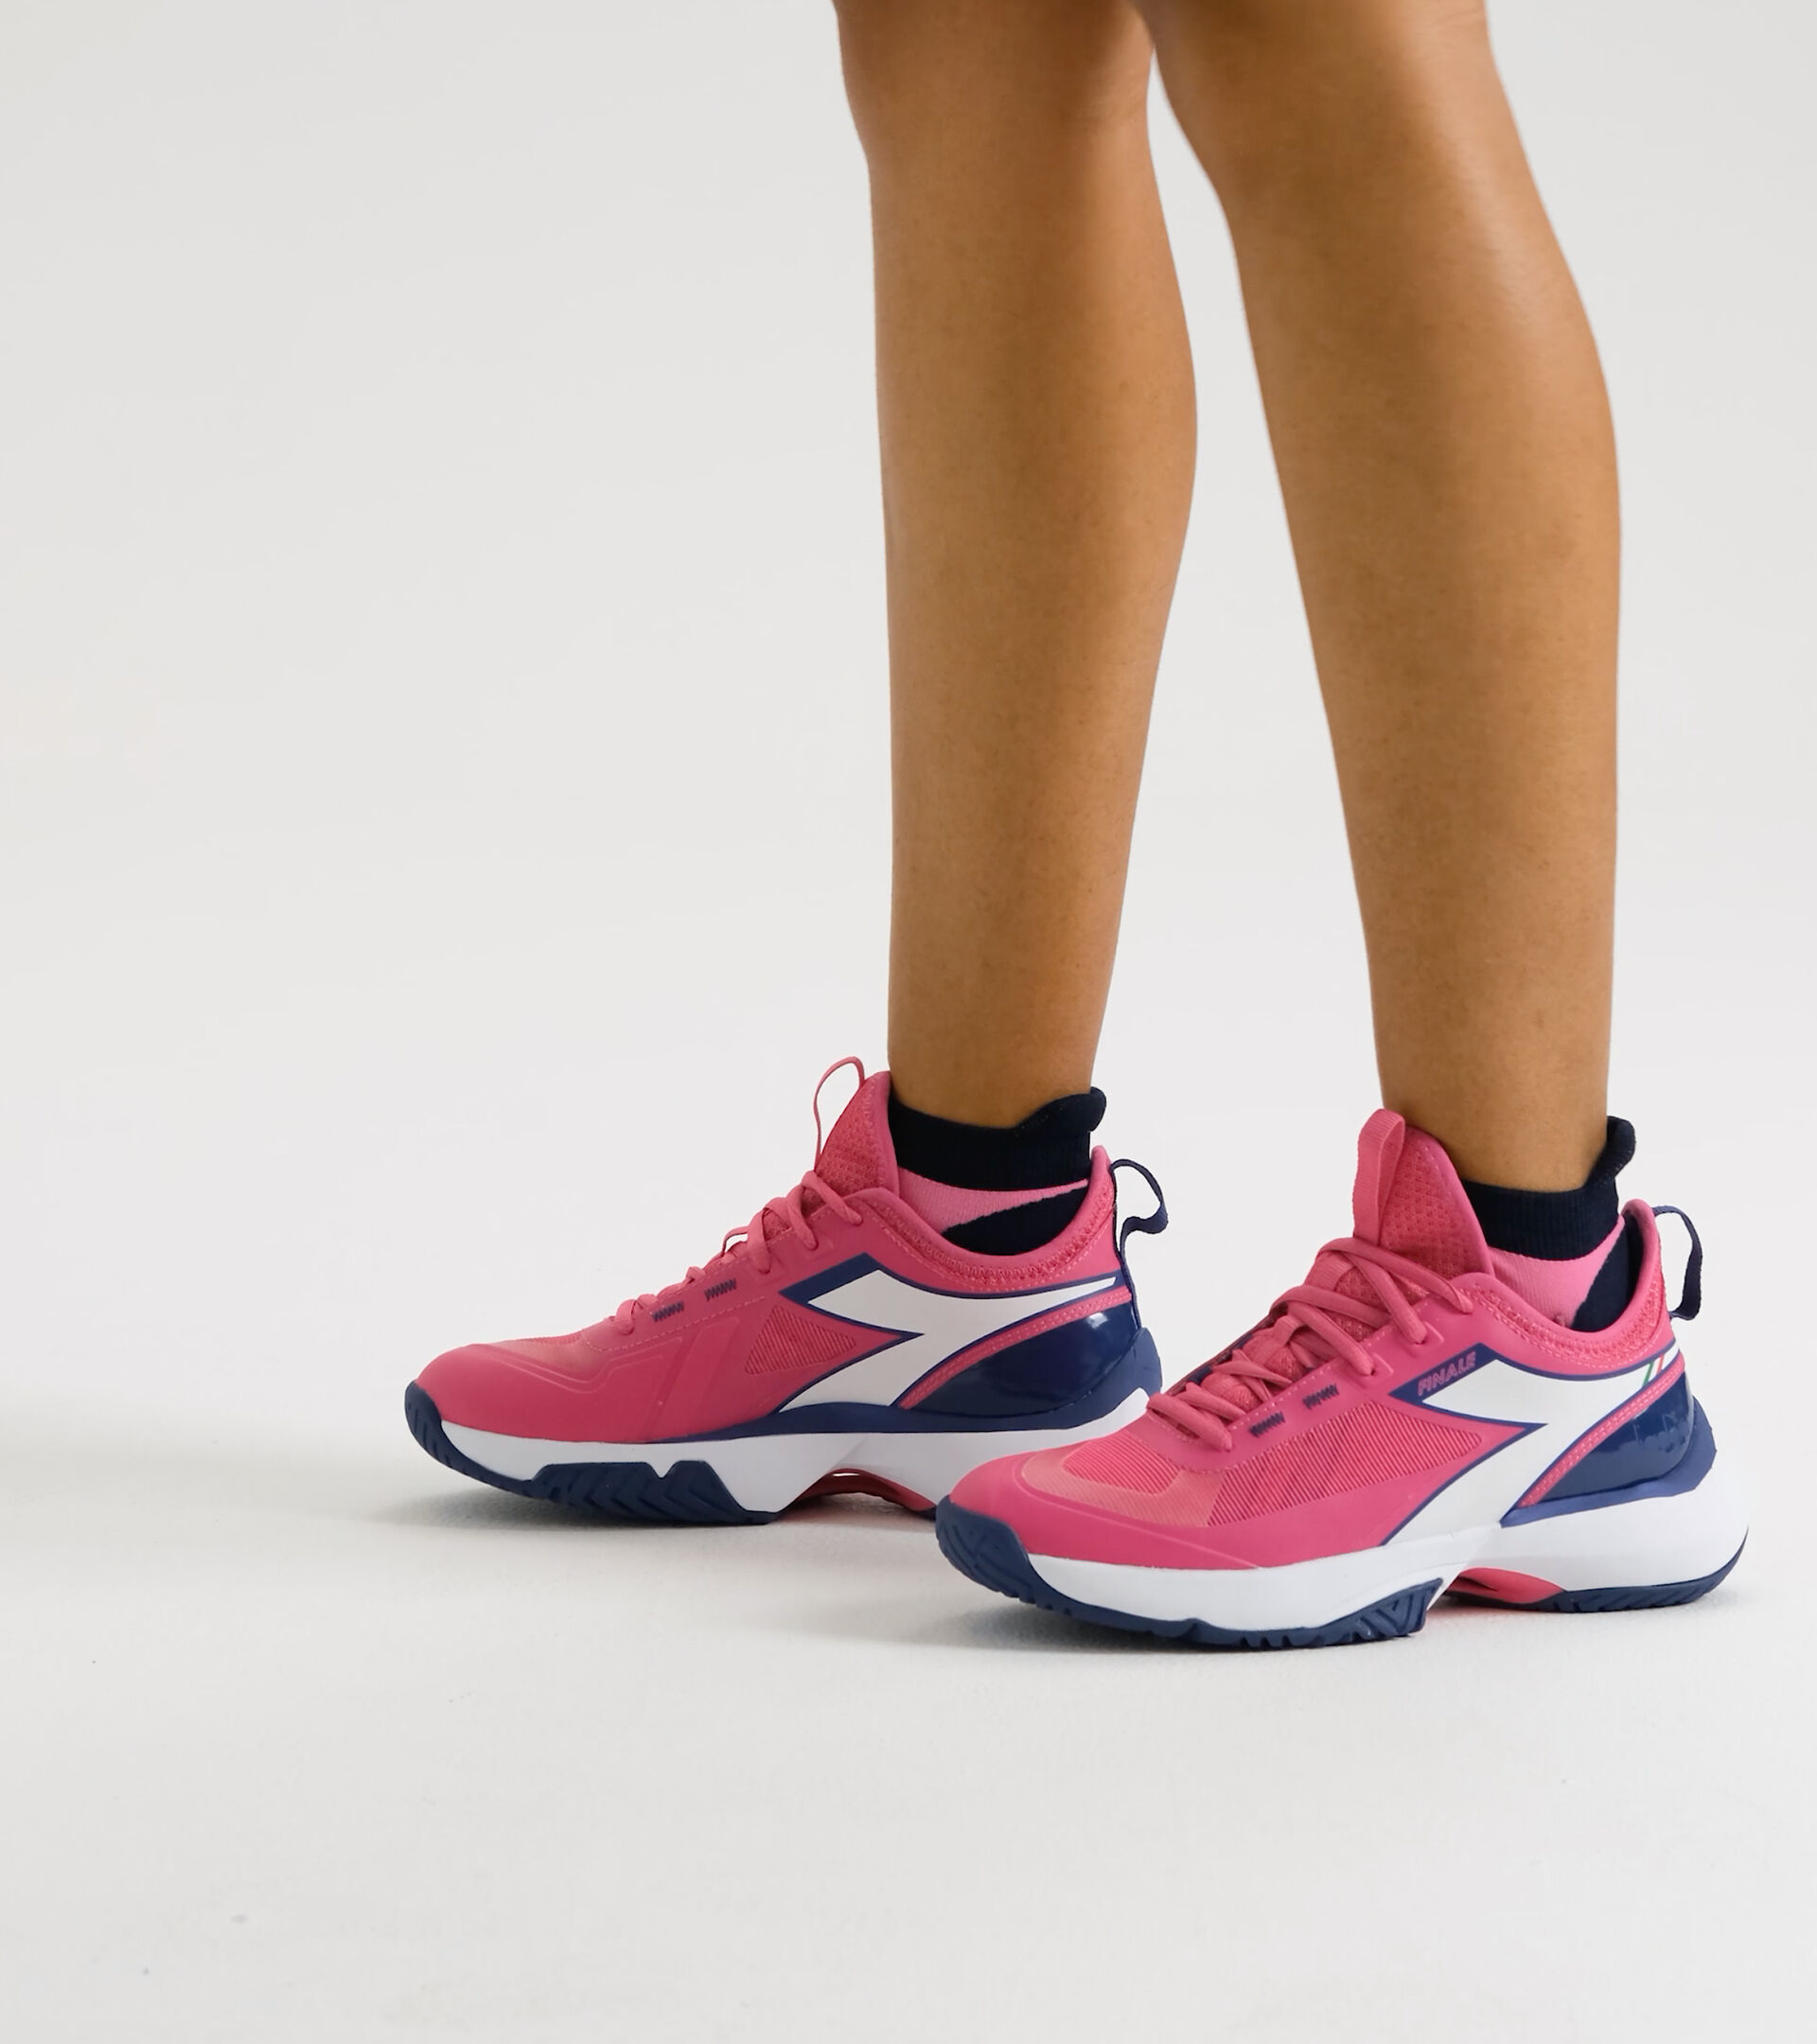 Tennis shoes for hard surfaces or clay courts - Women FINALE W AG PINK YARROW/WHITE/BLUEPRINT - Diadora